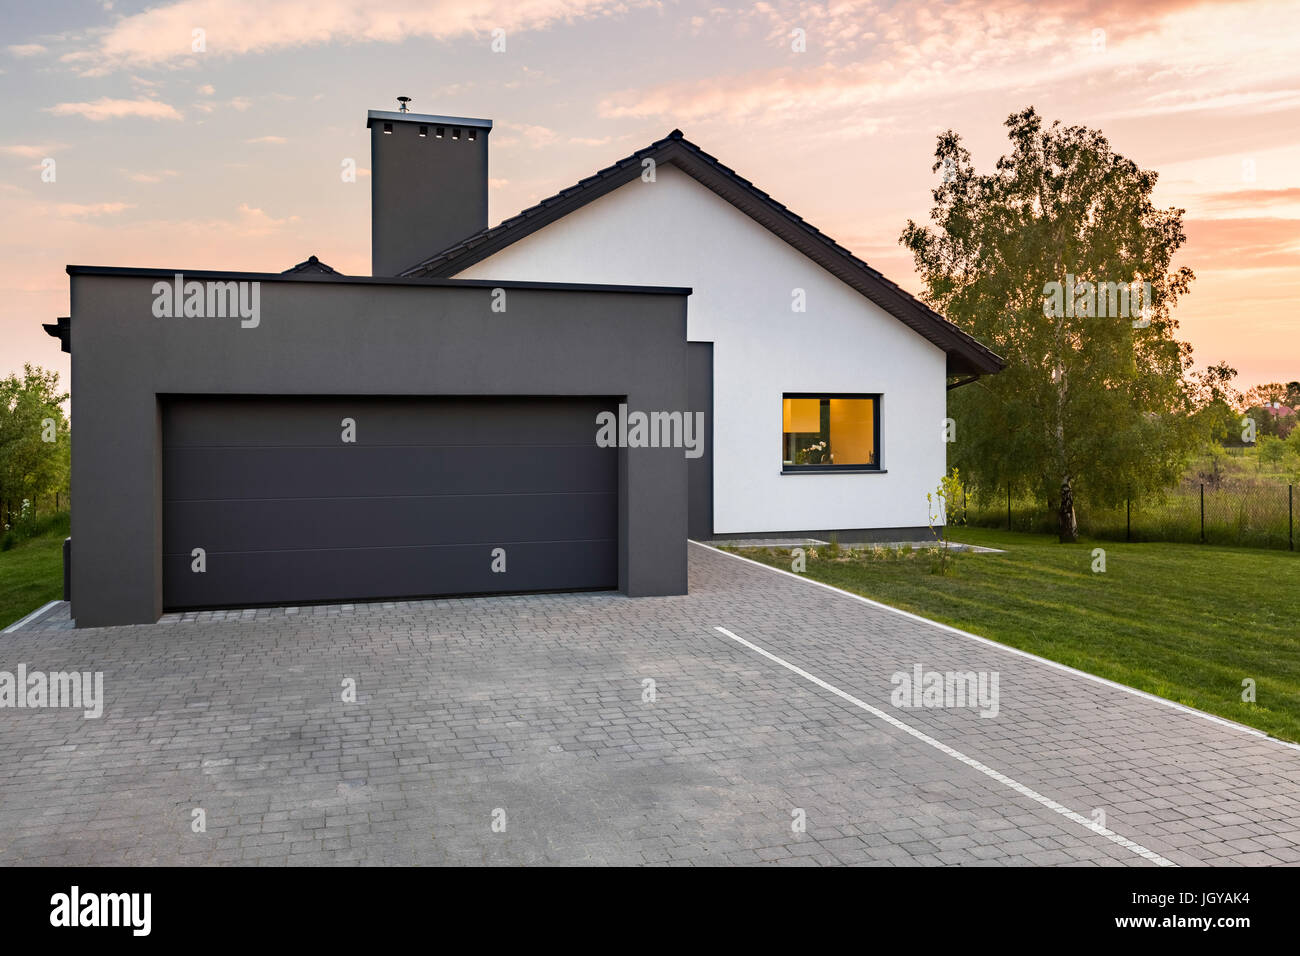 Stylish house with garage and cobblestone driveway, outdoors Stock Photo